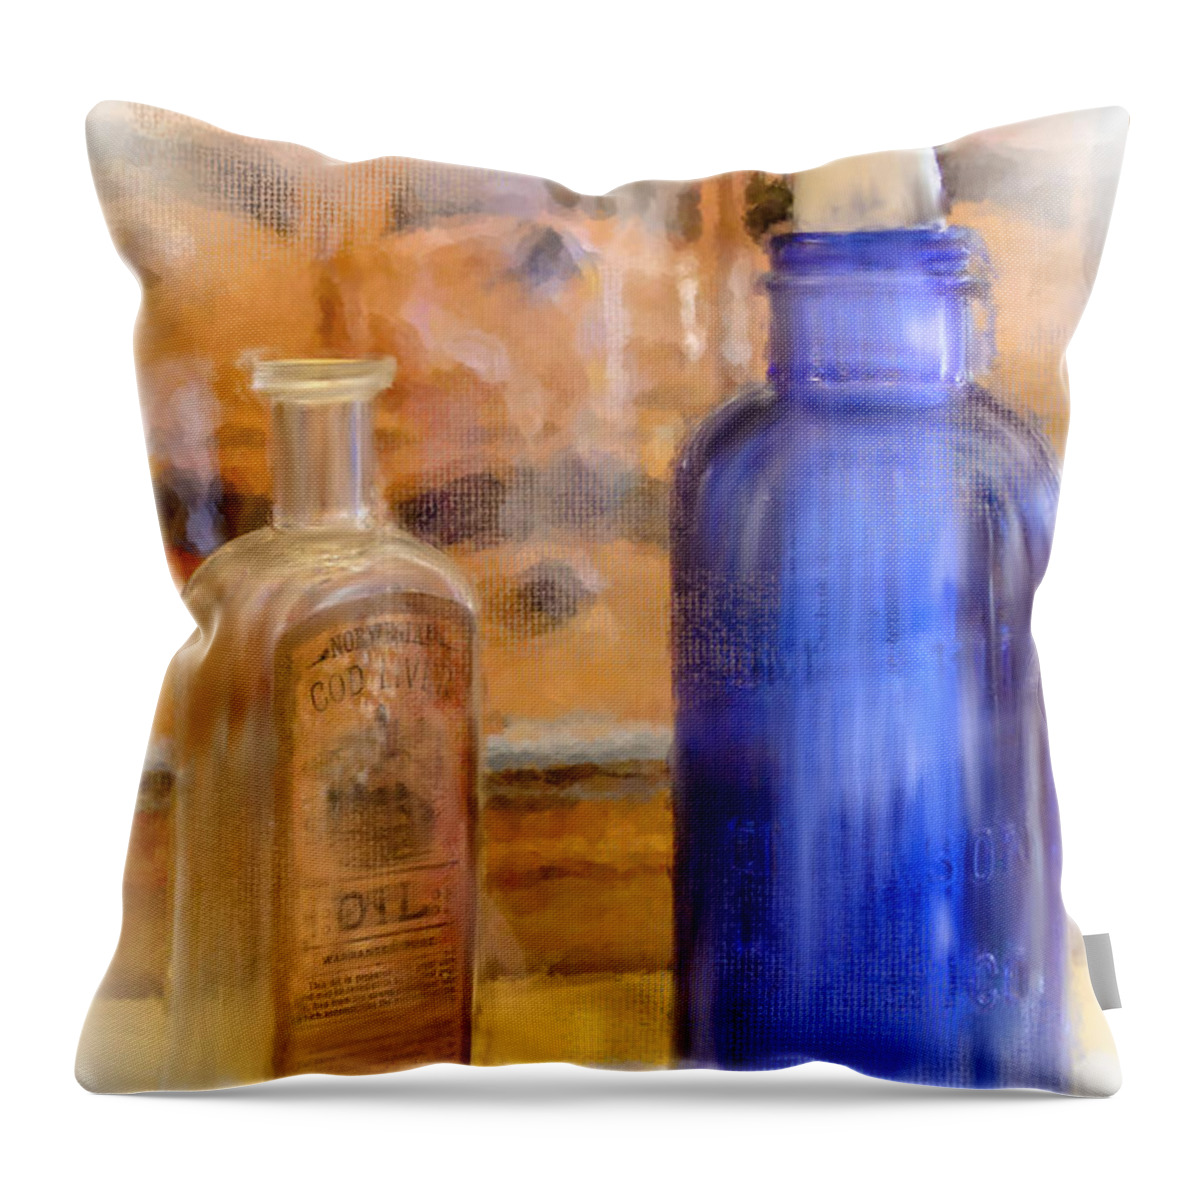 Pharmacy Throw Pillow featuring the photograph Apothecary by Mary Timman